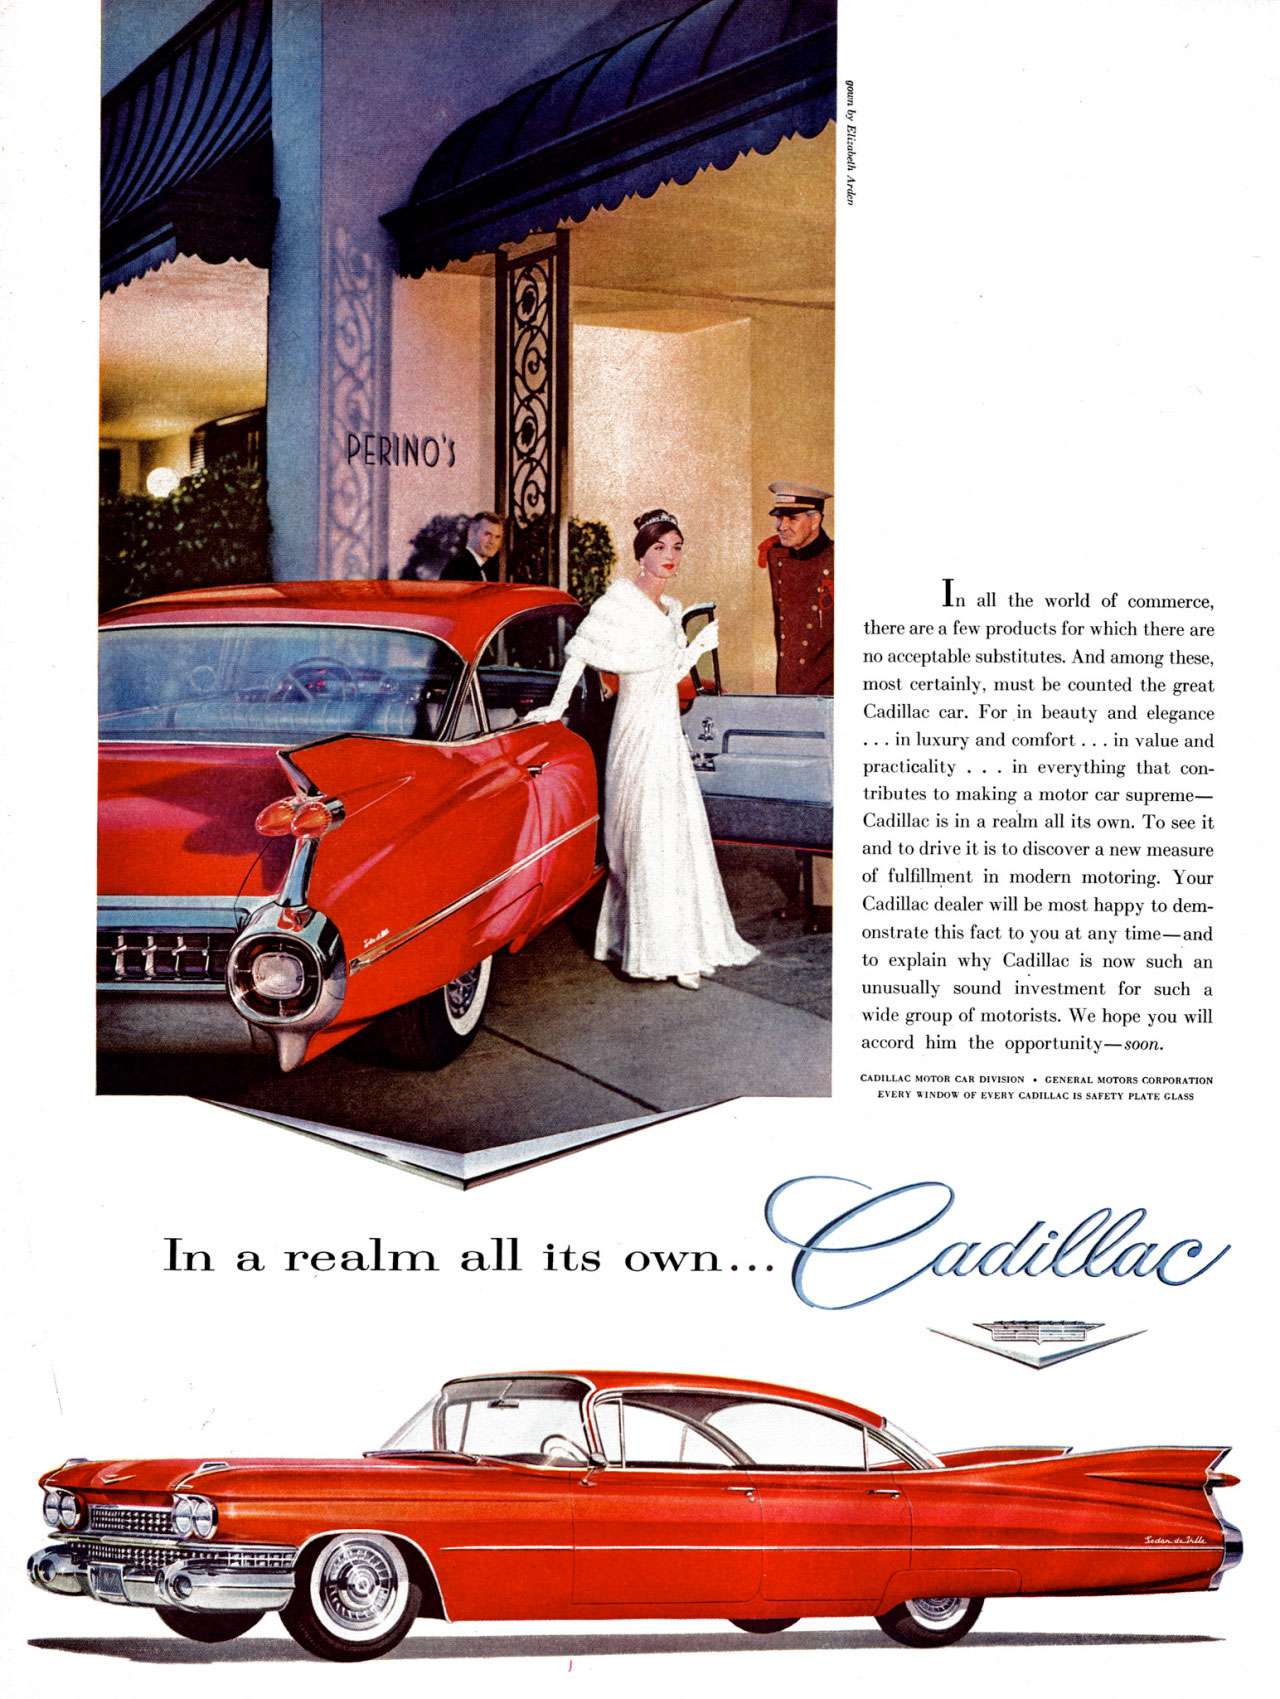 In a realm all its own... Cadillac.